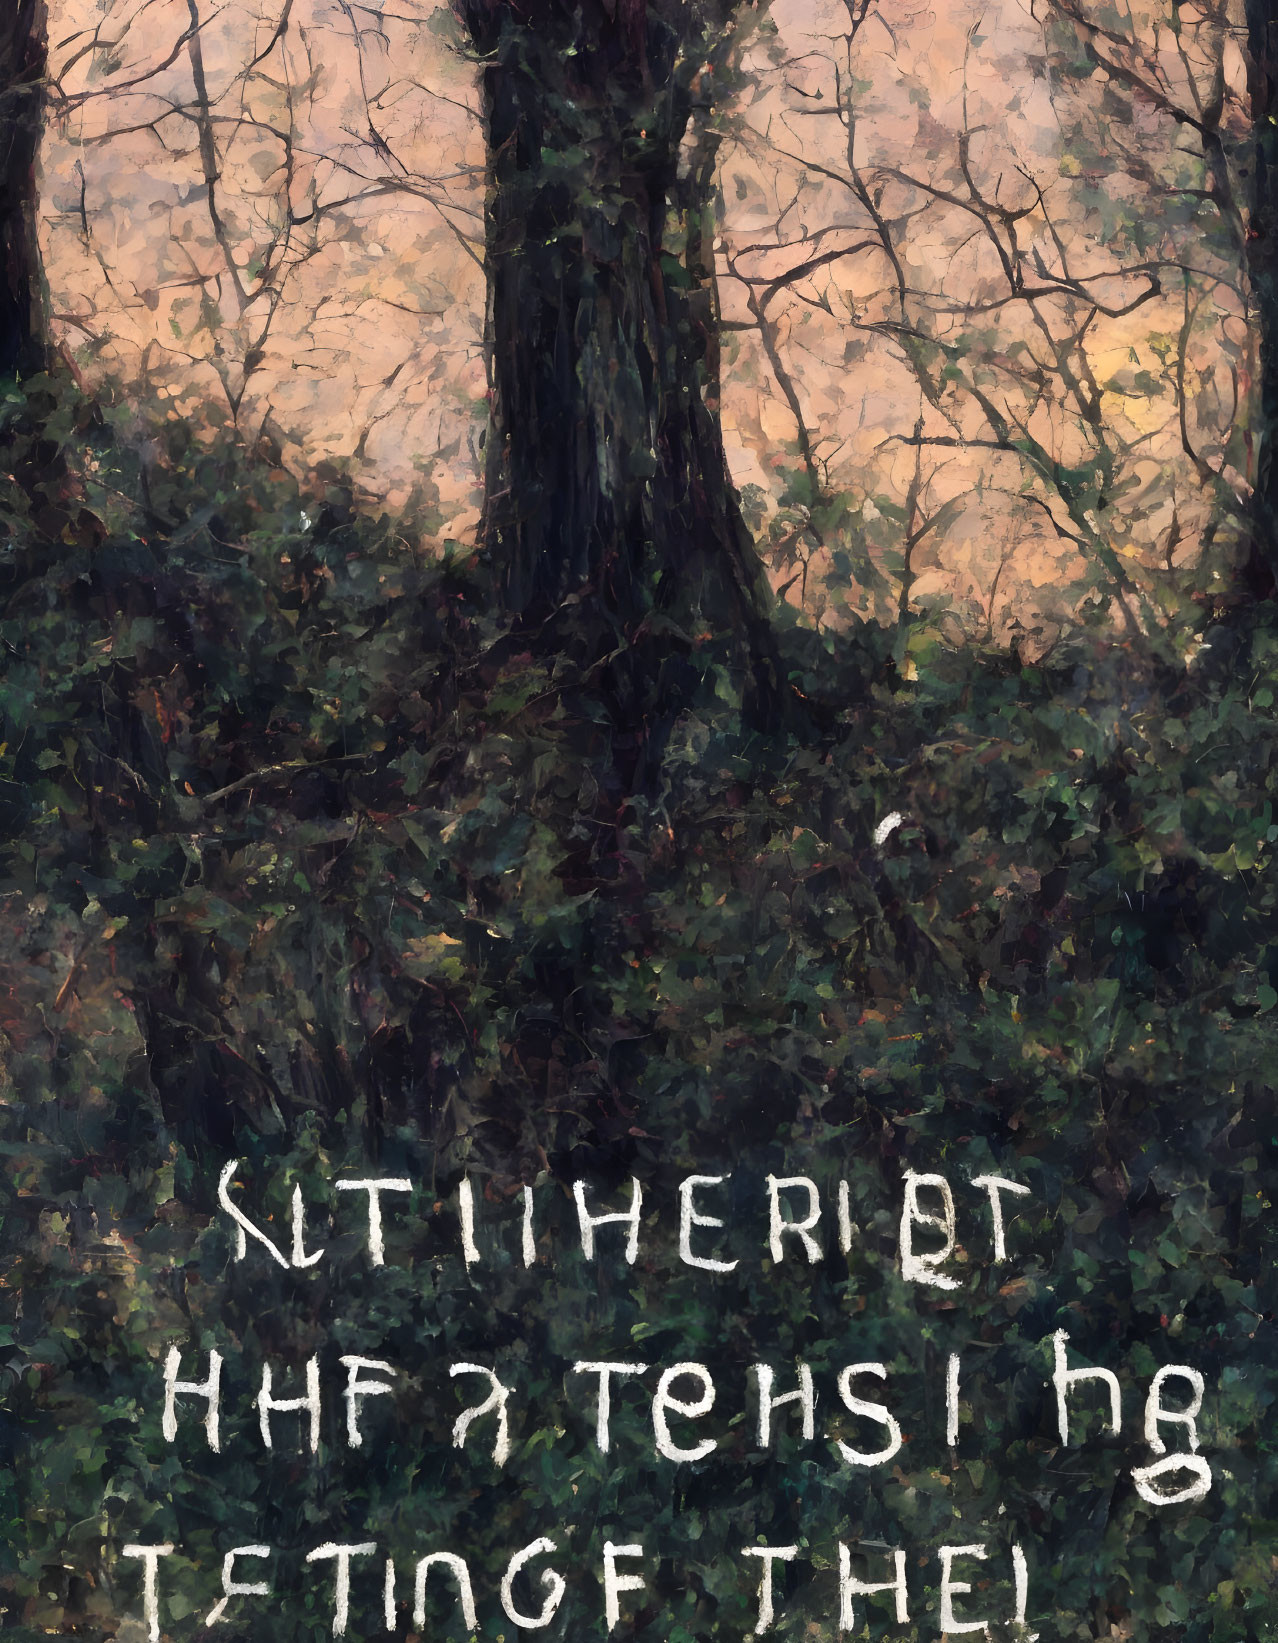 Dark tree with dense foliage and mysterious white text painting.